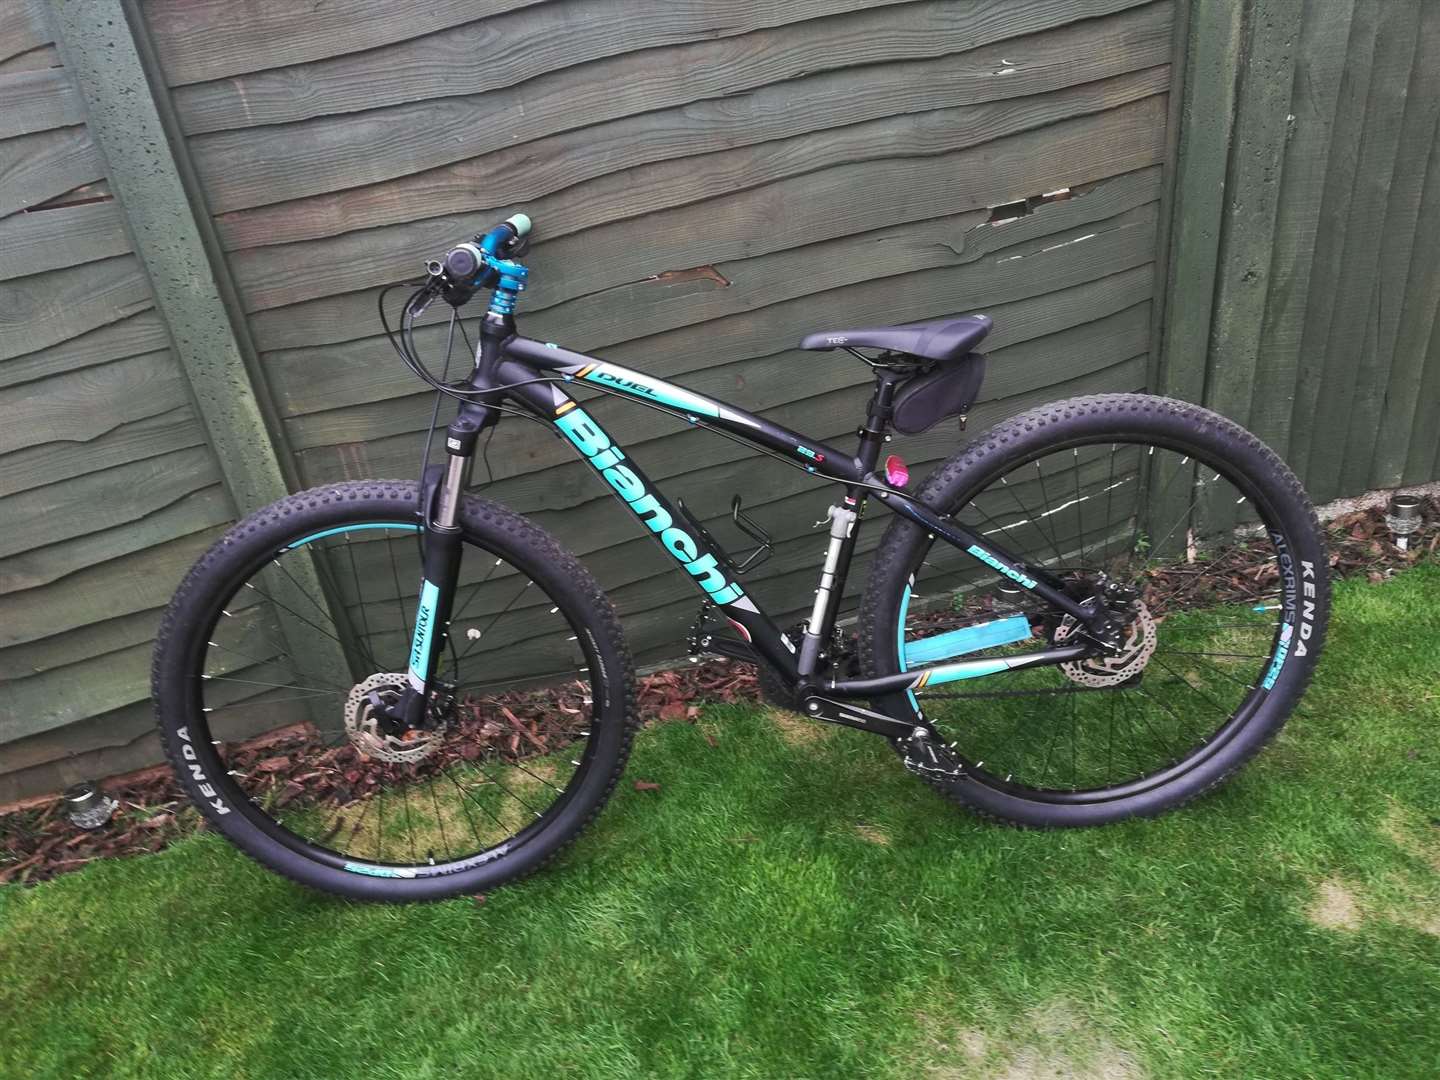 The Bianchi mountain bike was stolen in a reported burglary last month Picture: Kent Police